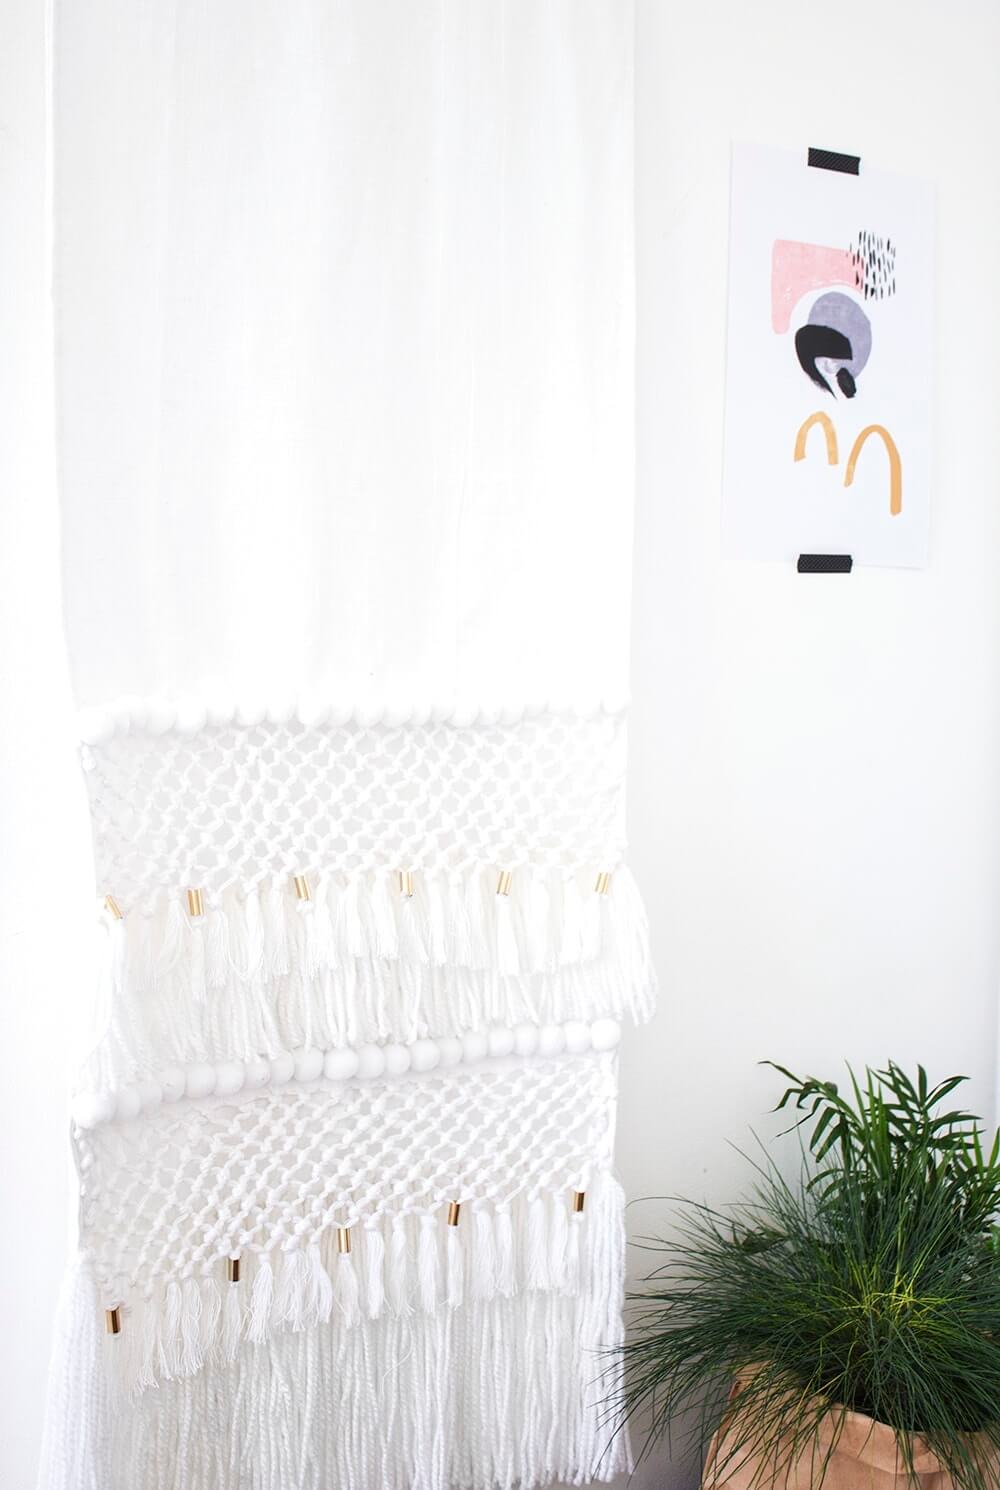 Beautiful No-Weave Tapestry for Negative Wall Space